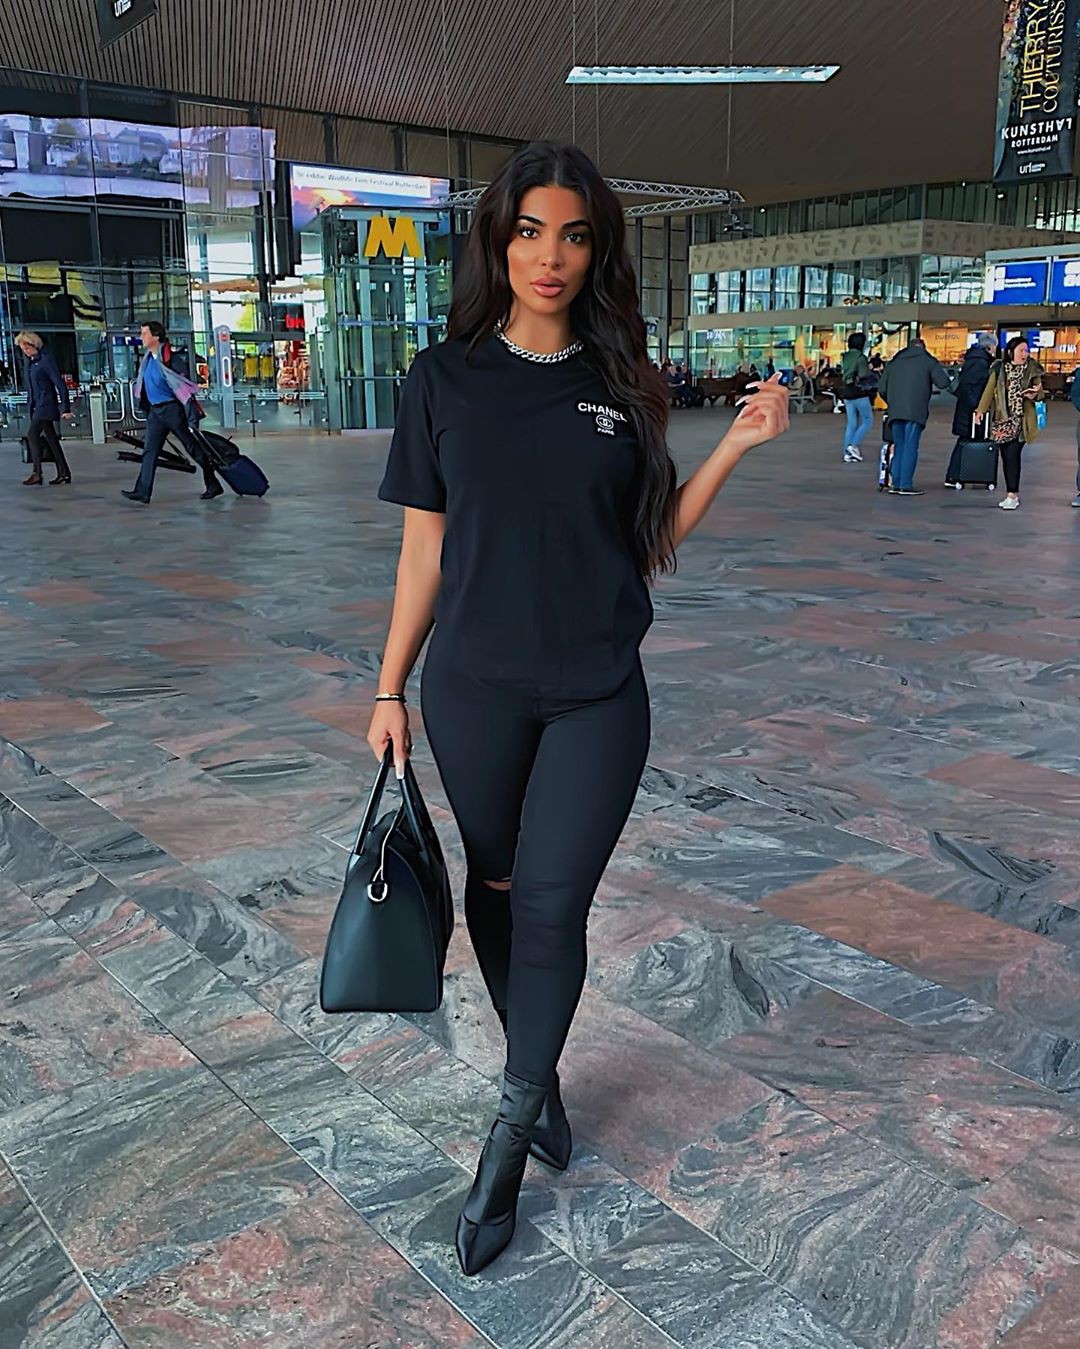 Sofia Instagram Pic, All Black Outfit ...